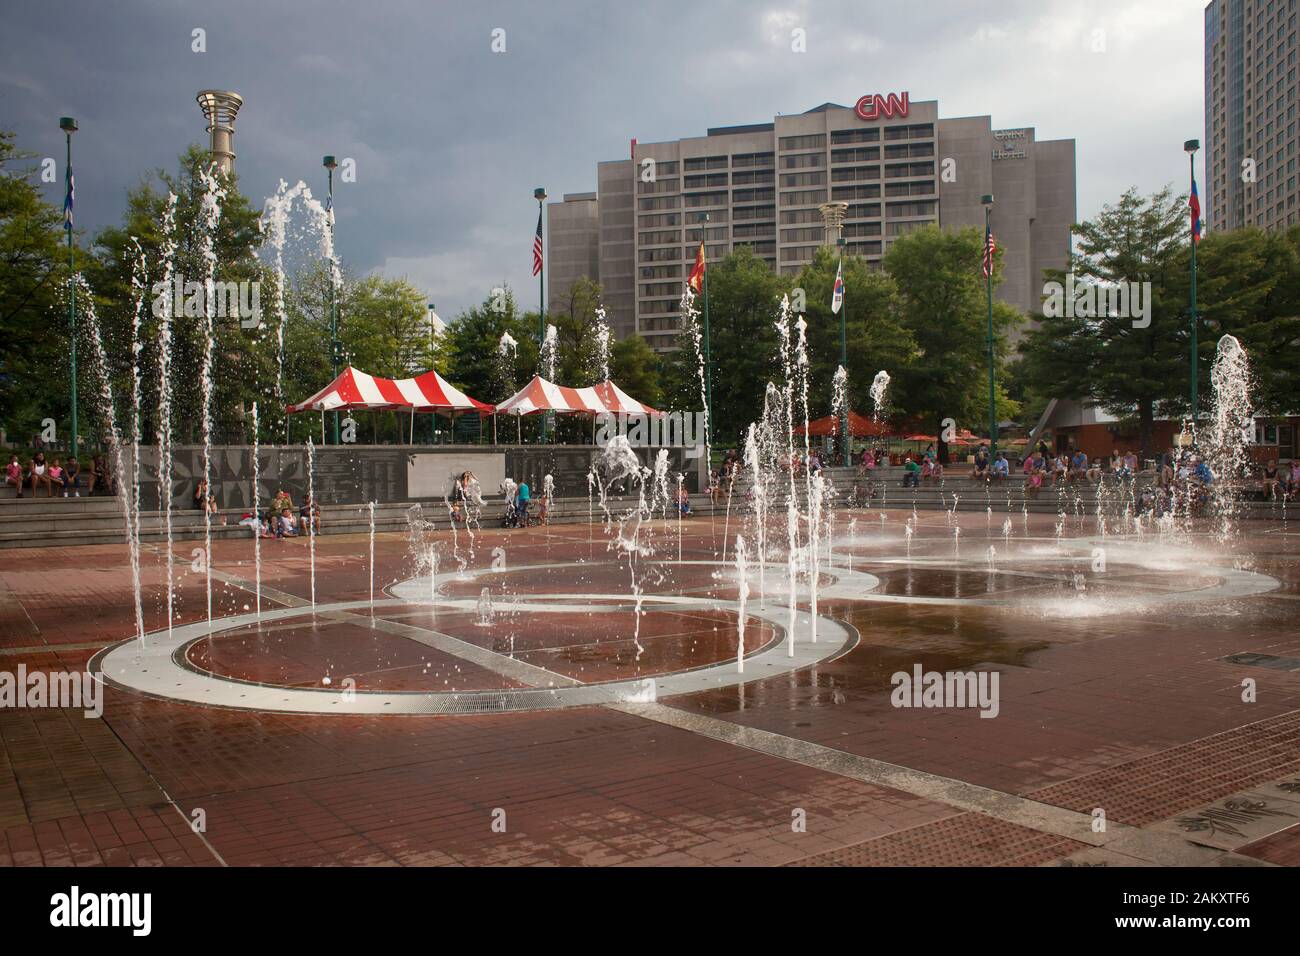 Water and sound show at the Centennial Olympic Park fountain with the CNN building at the back, Downtown Atlanta, Georgia, USA Stock Photo